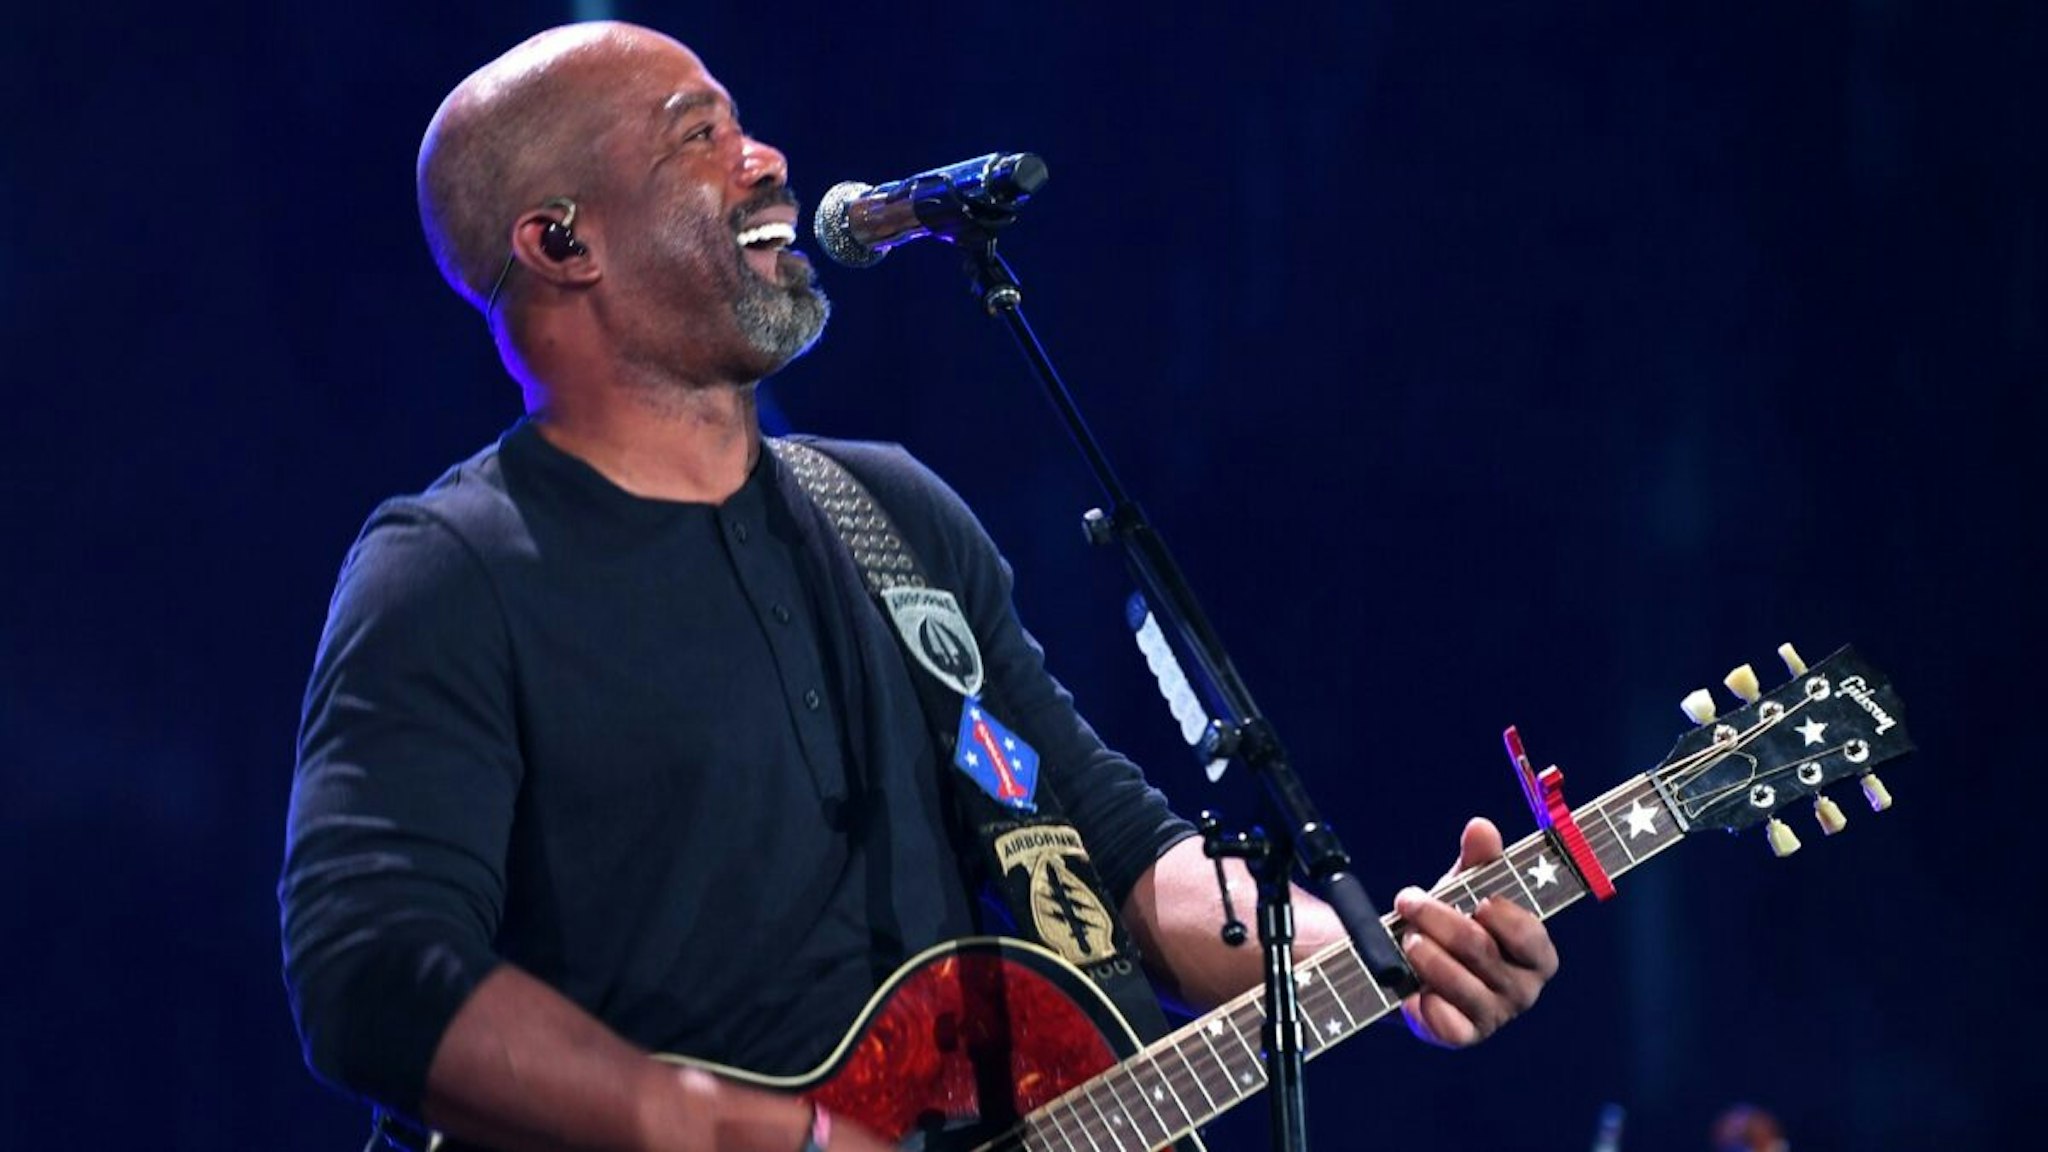 Darius Rucker performs onstage during the 2021 iHeartRadio Music Festival on September 17, 2021 at T-Mobile Arena in Las Vegas, Nevada.